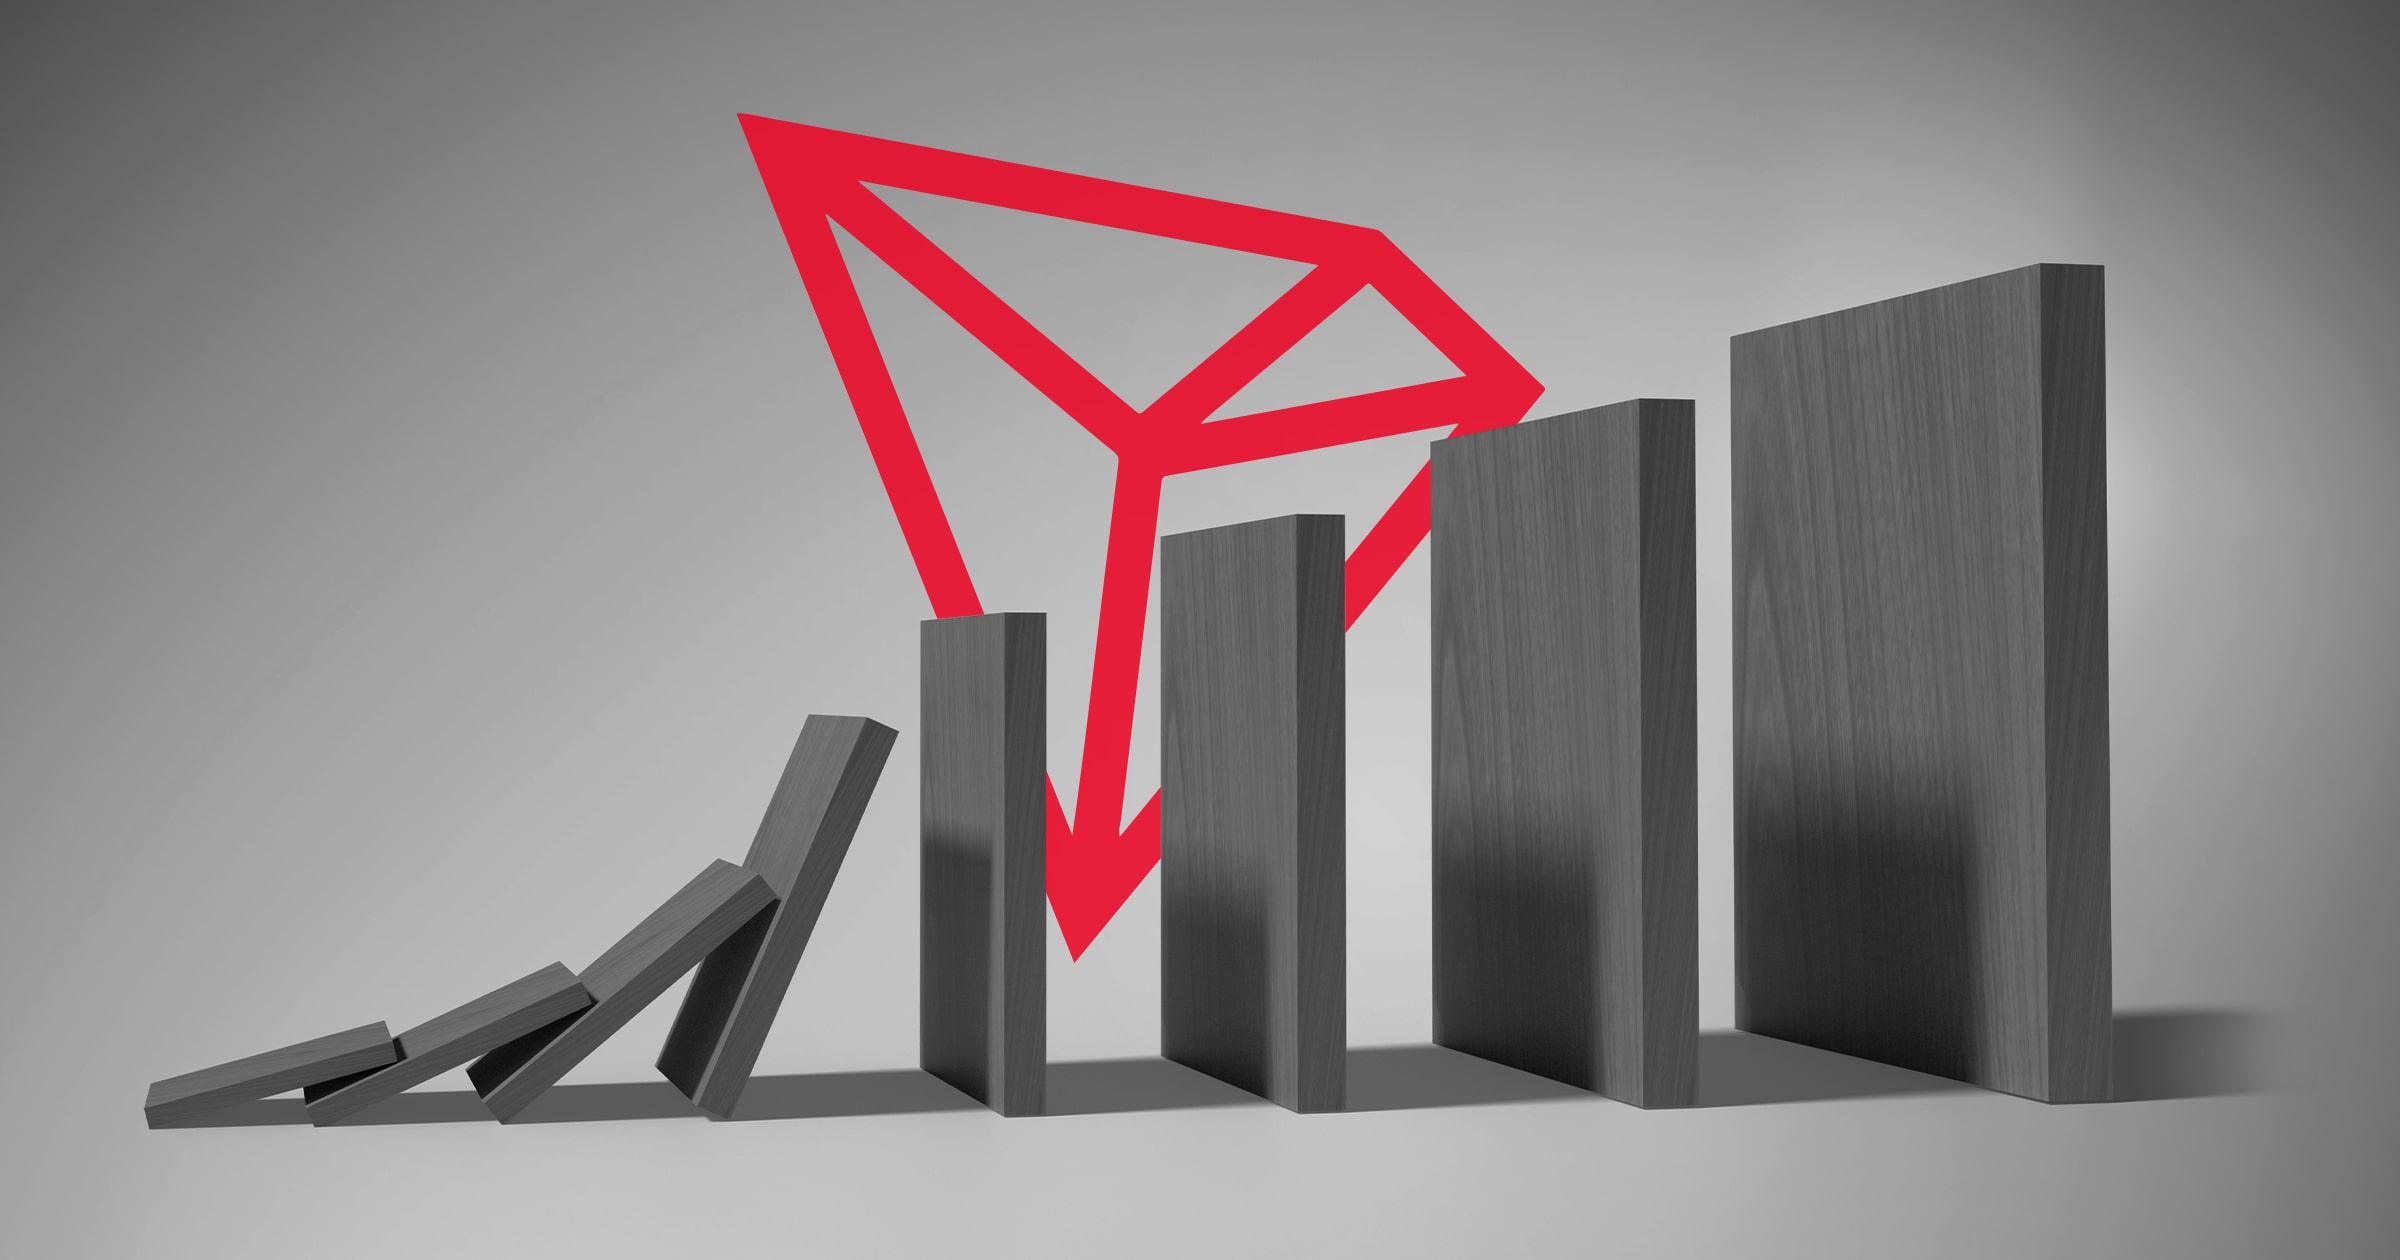 Tron’s TVL rises, taking third place behind Ethwreum and BNB Chain